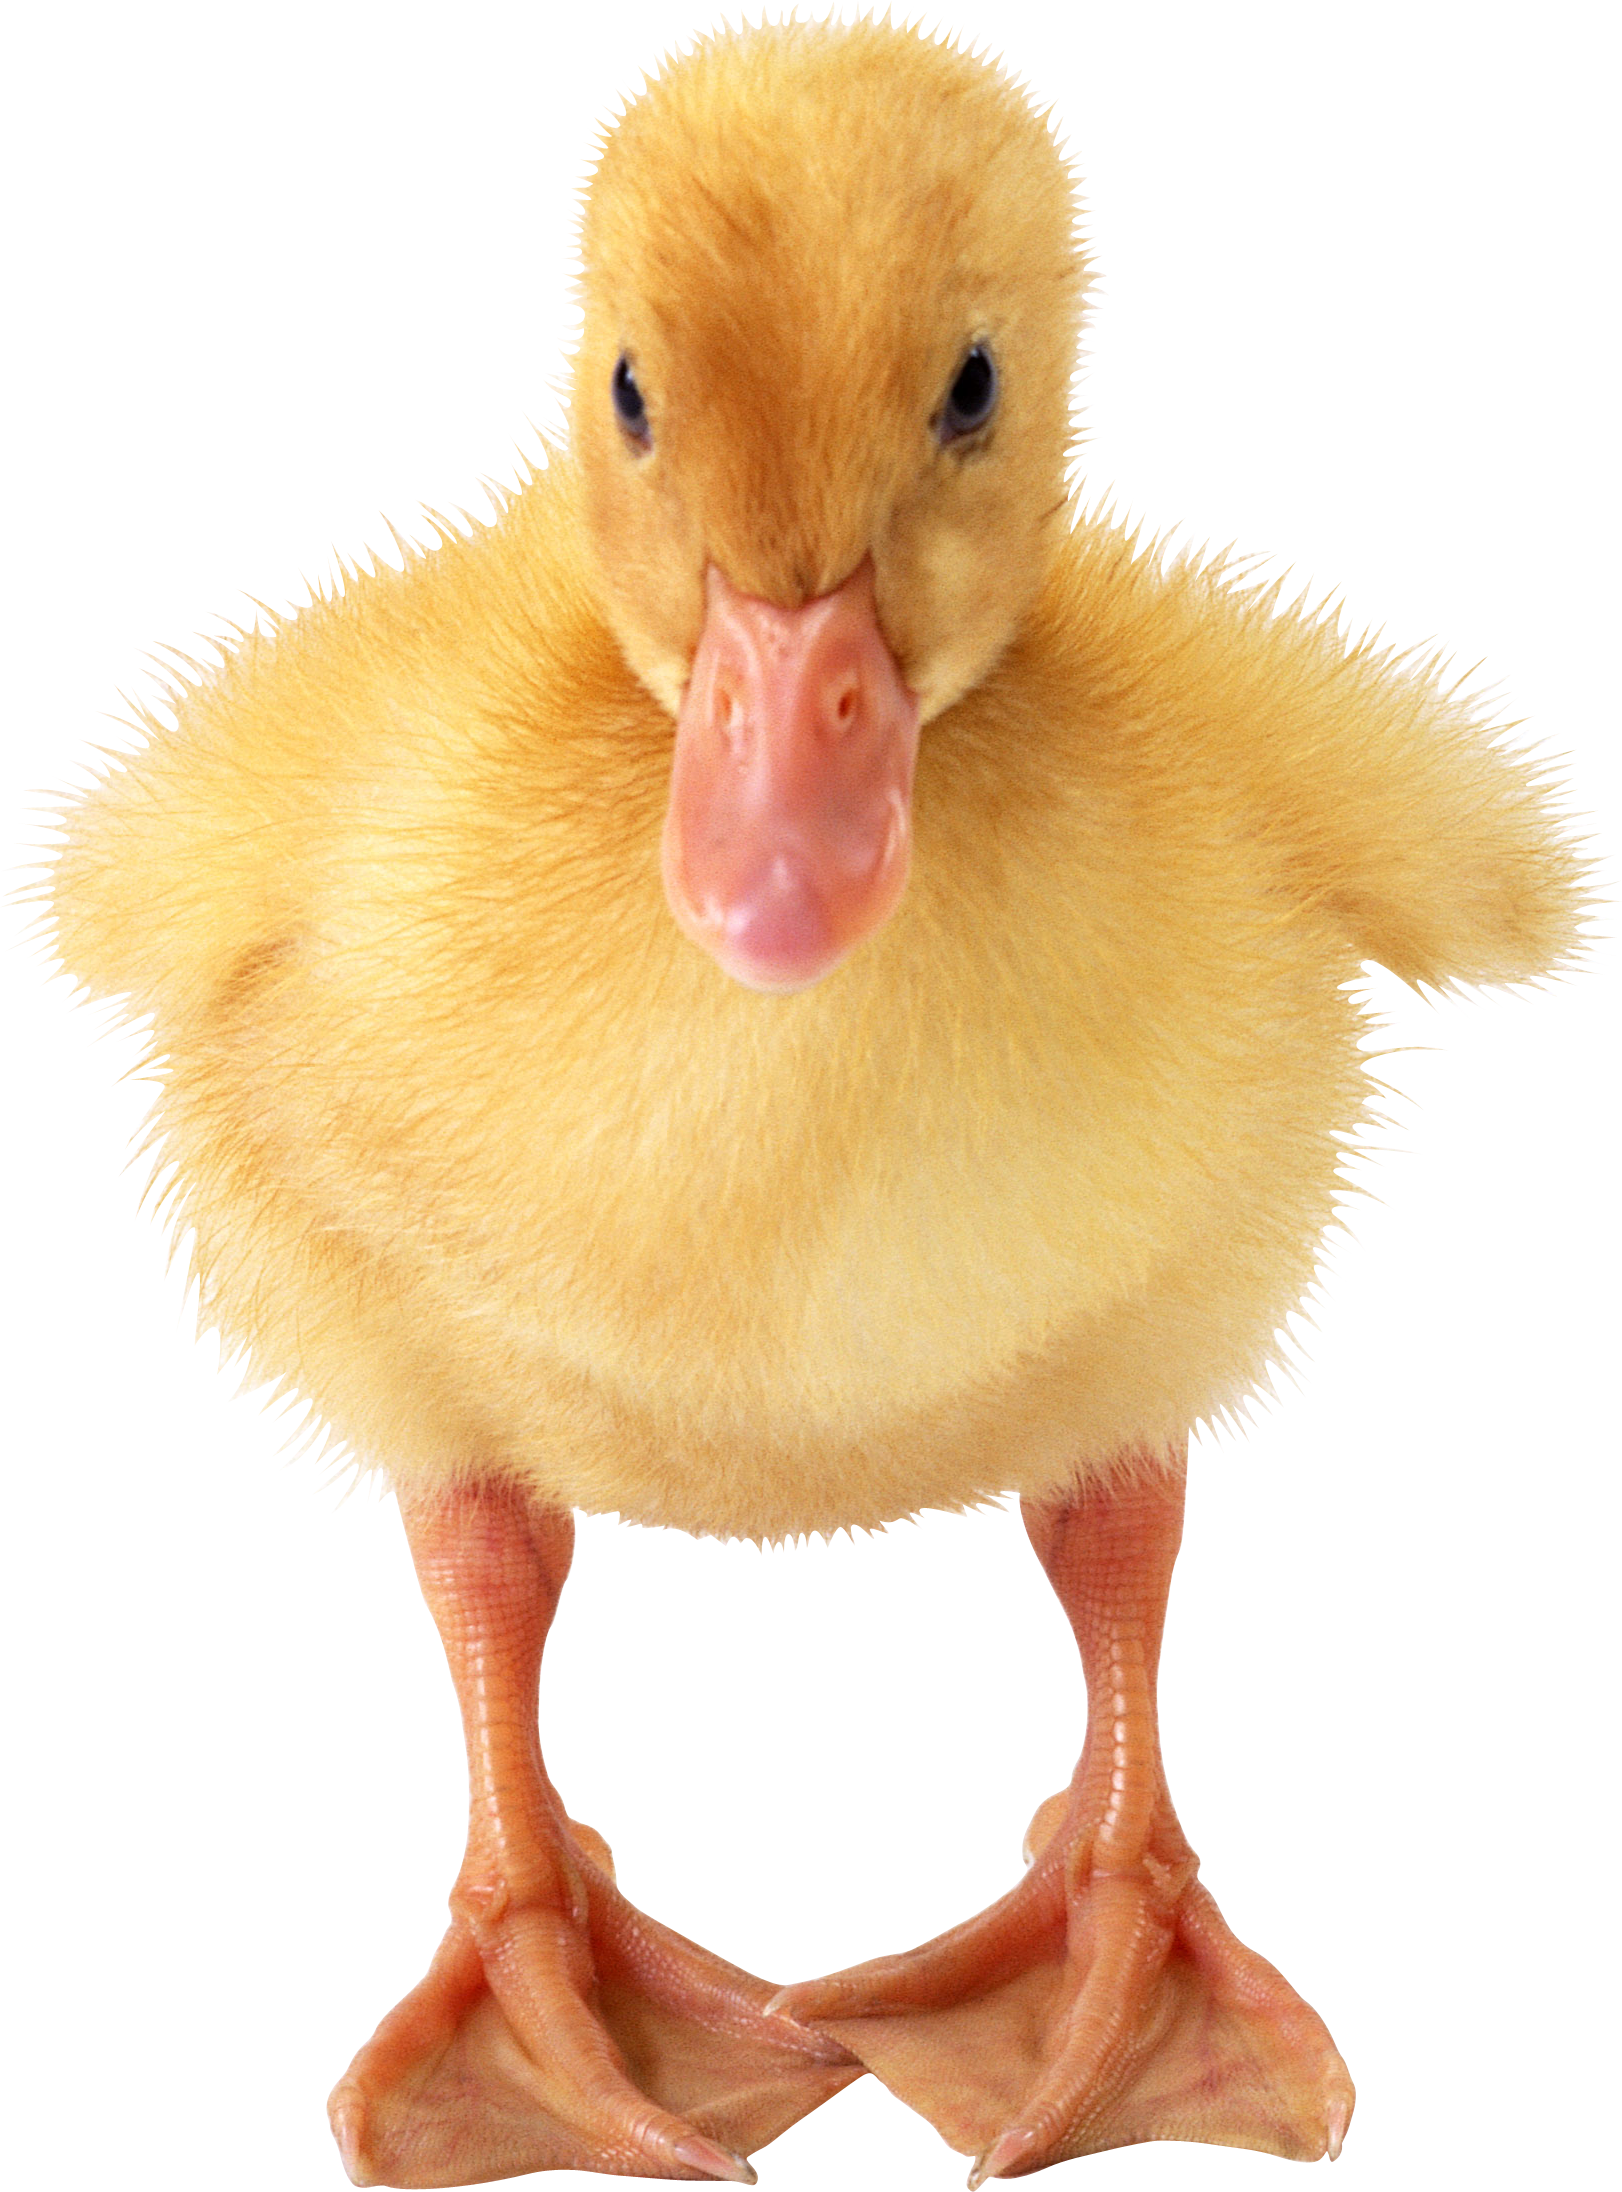 PNG Duckling - 84050